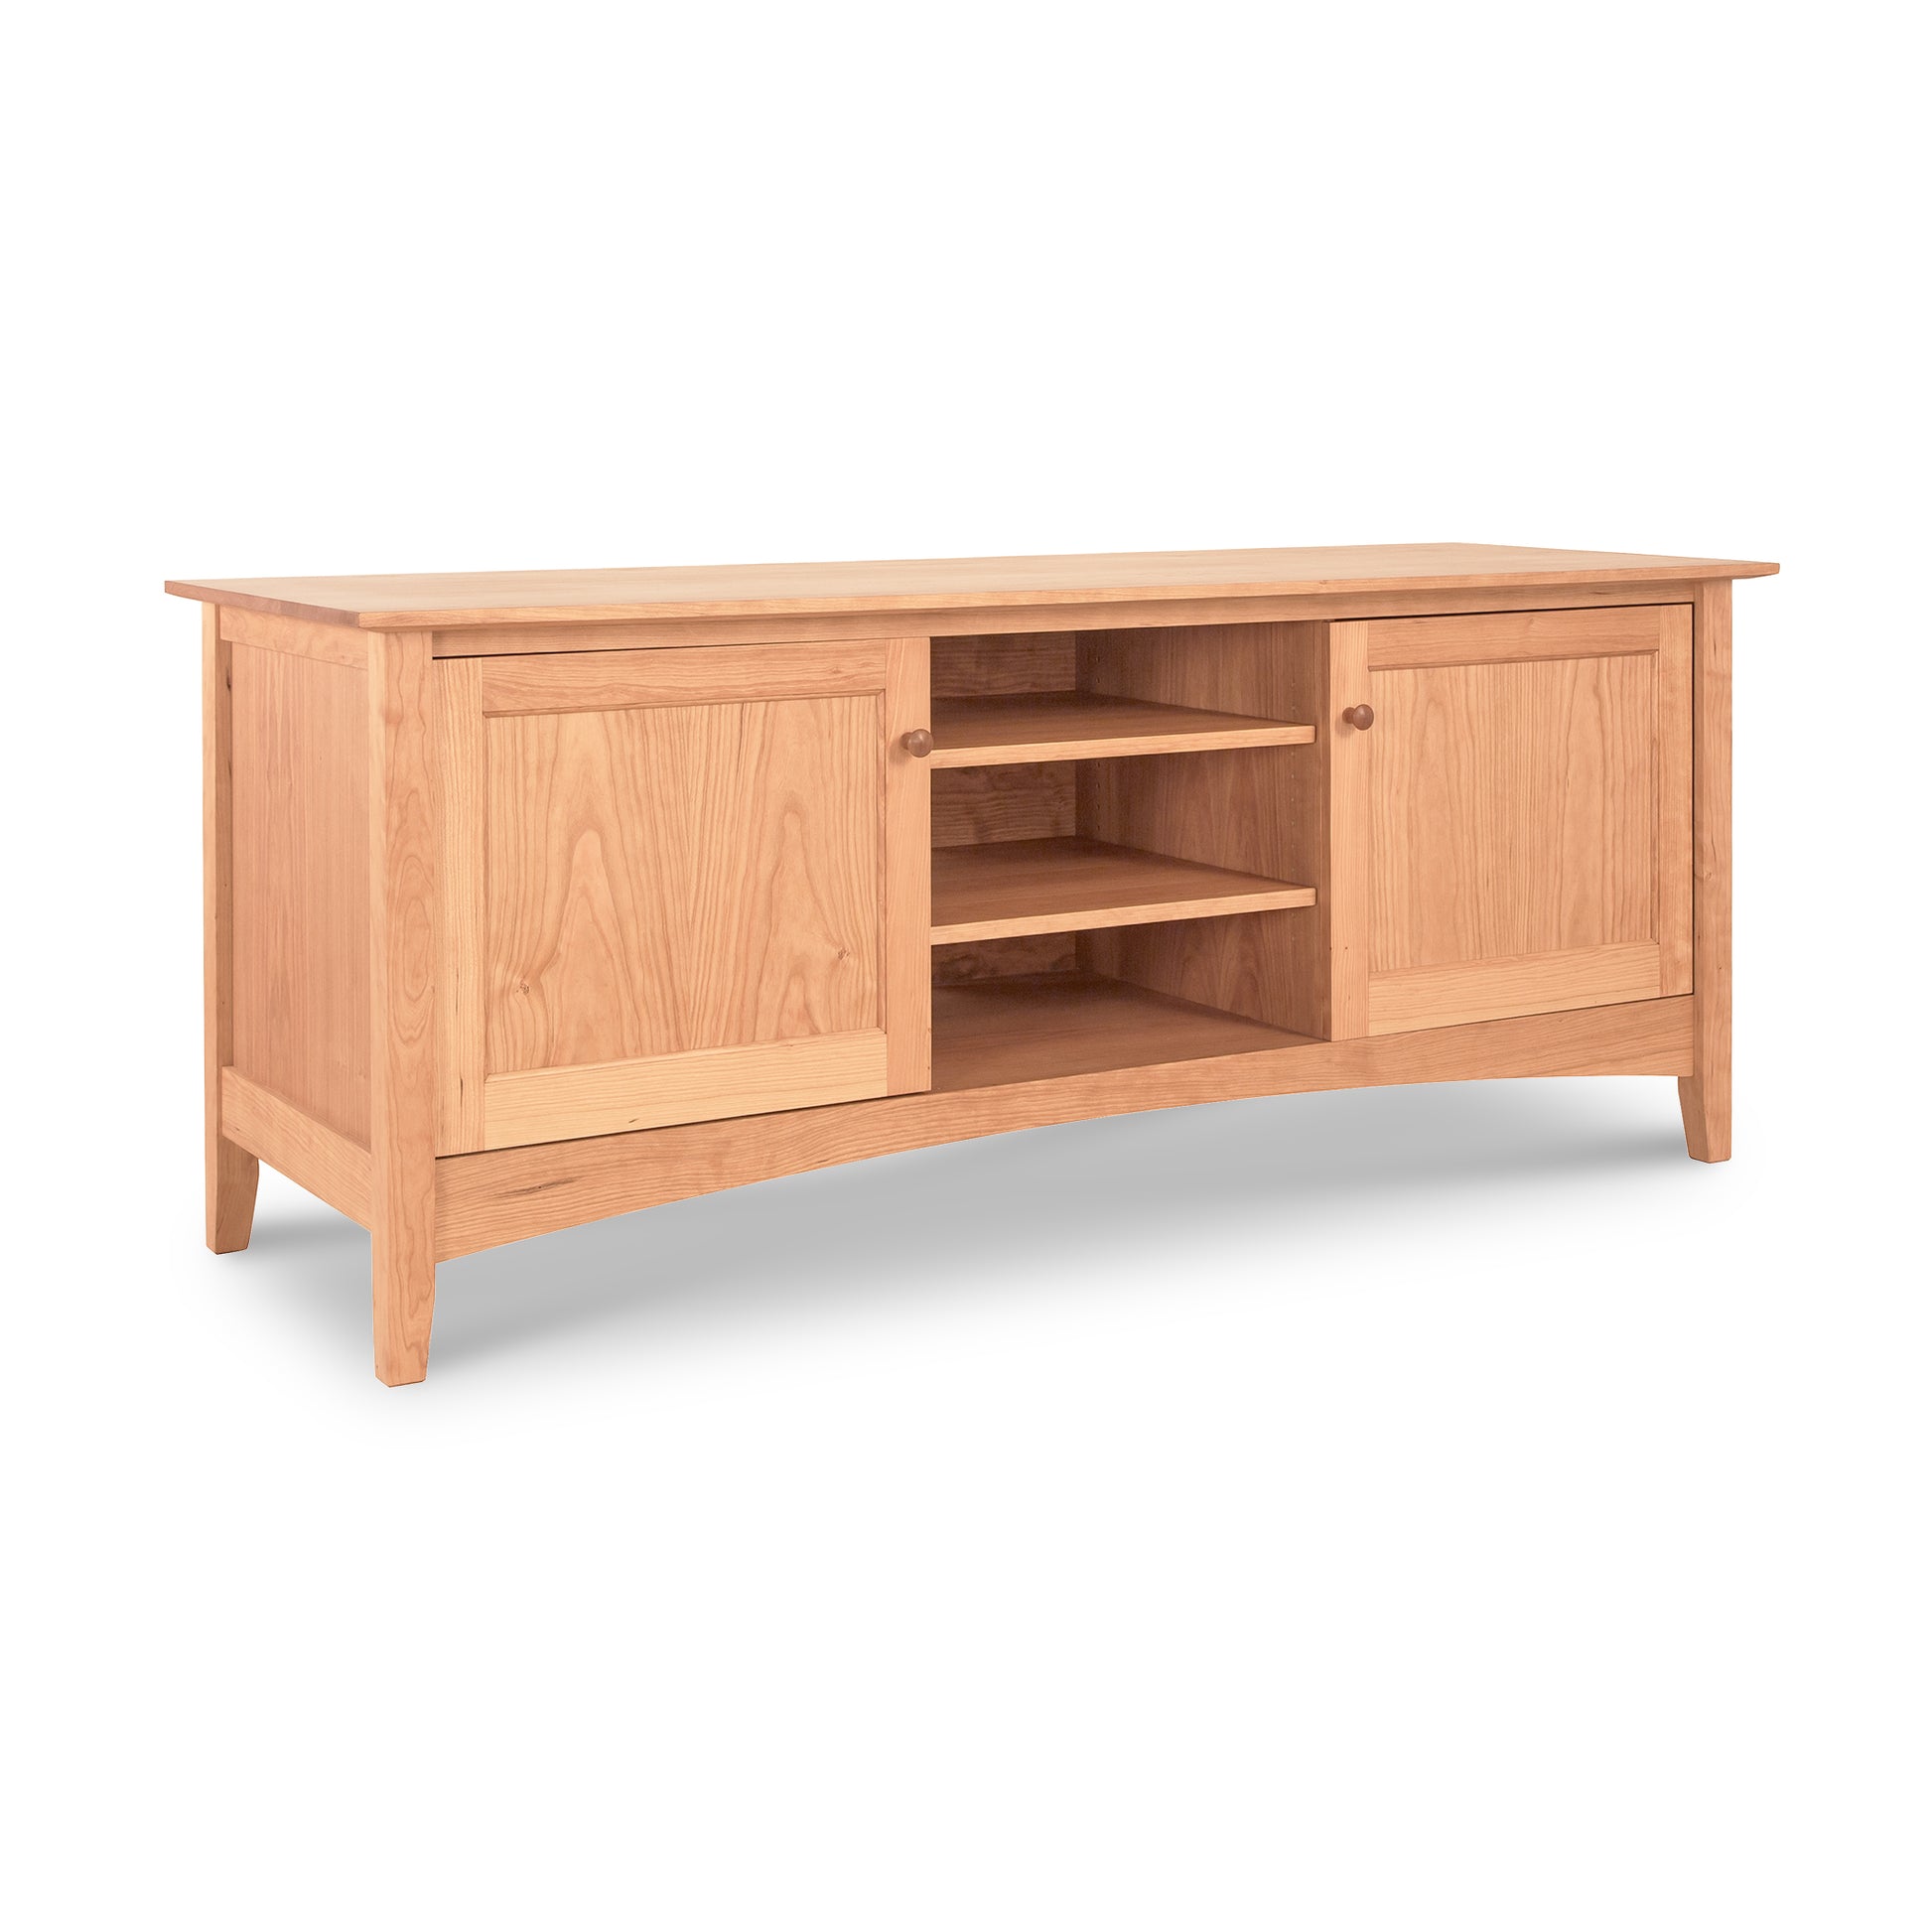 Maple Corner Woodworks American Shaker 67" TV Stand with open central shelves and closed cabinets on both sides, isolated on a white background.